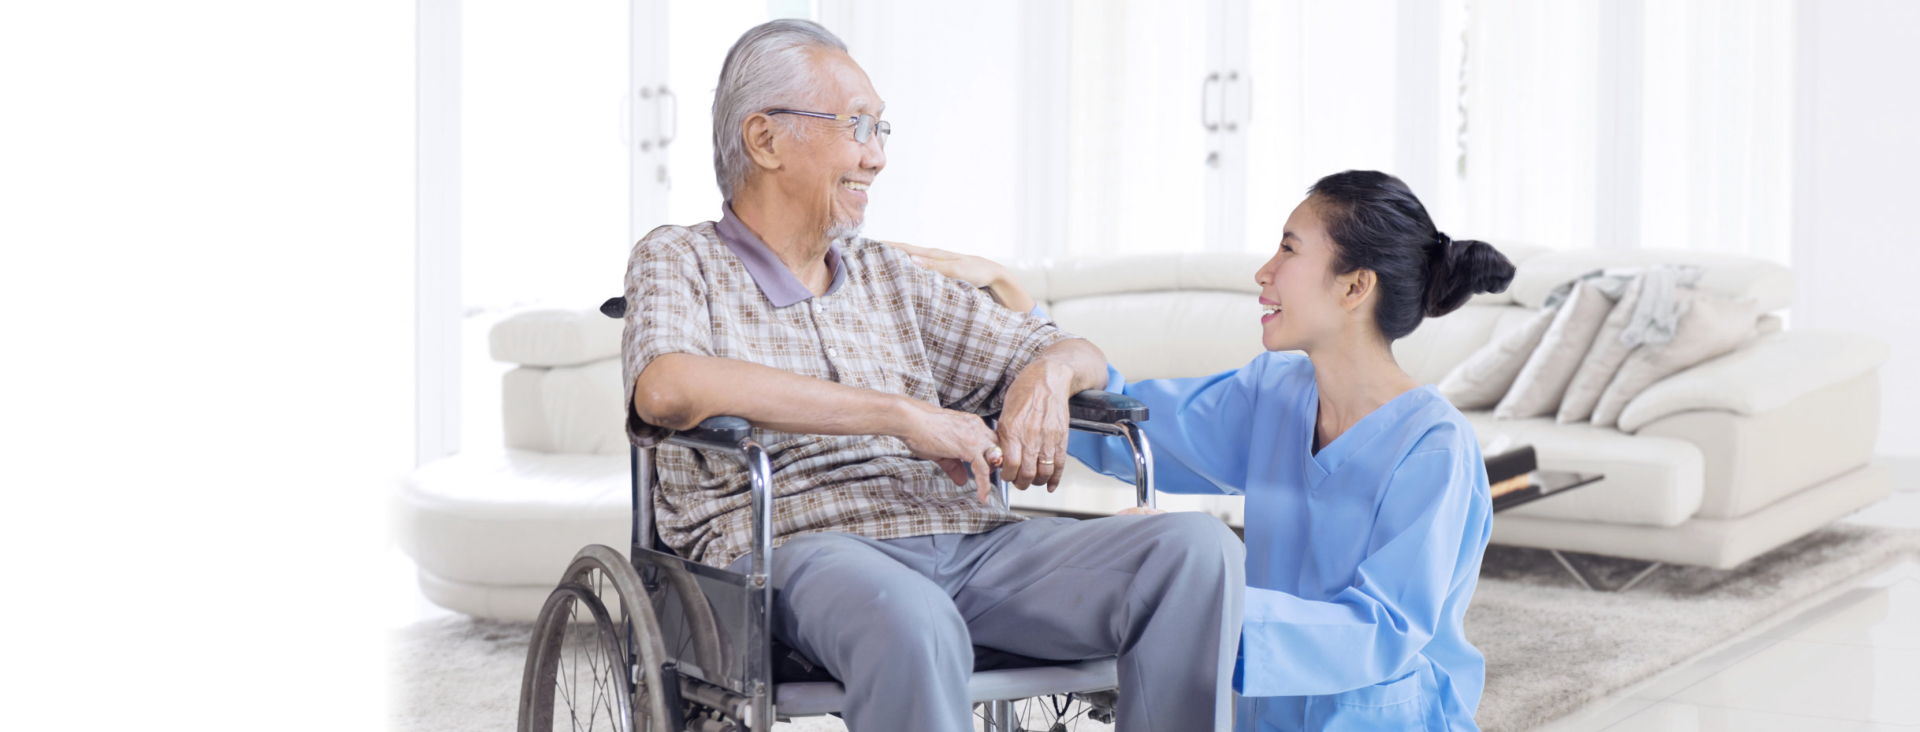 Senior man in a wheelchair and nurse facing each other while smiling